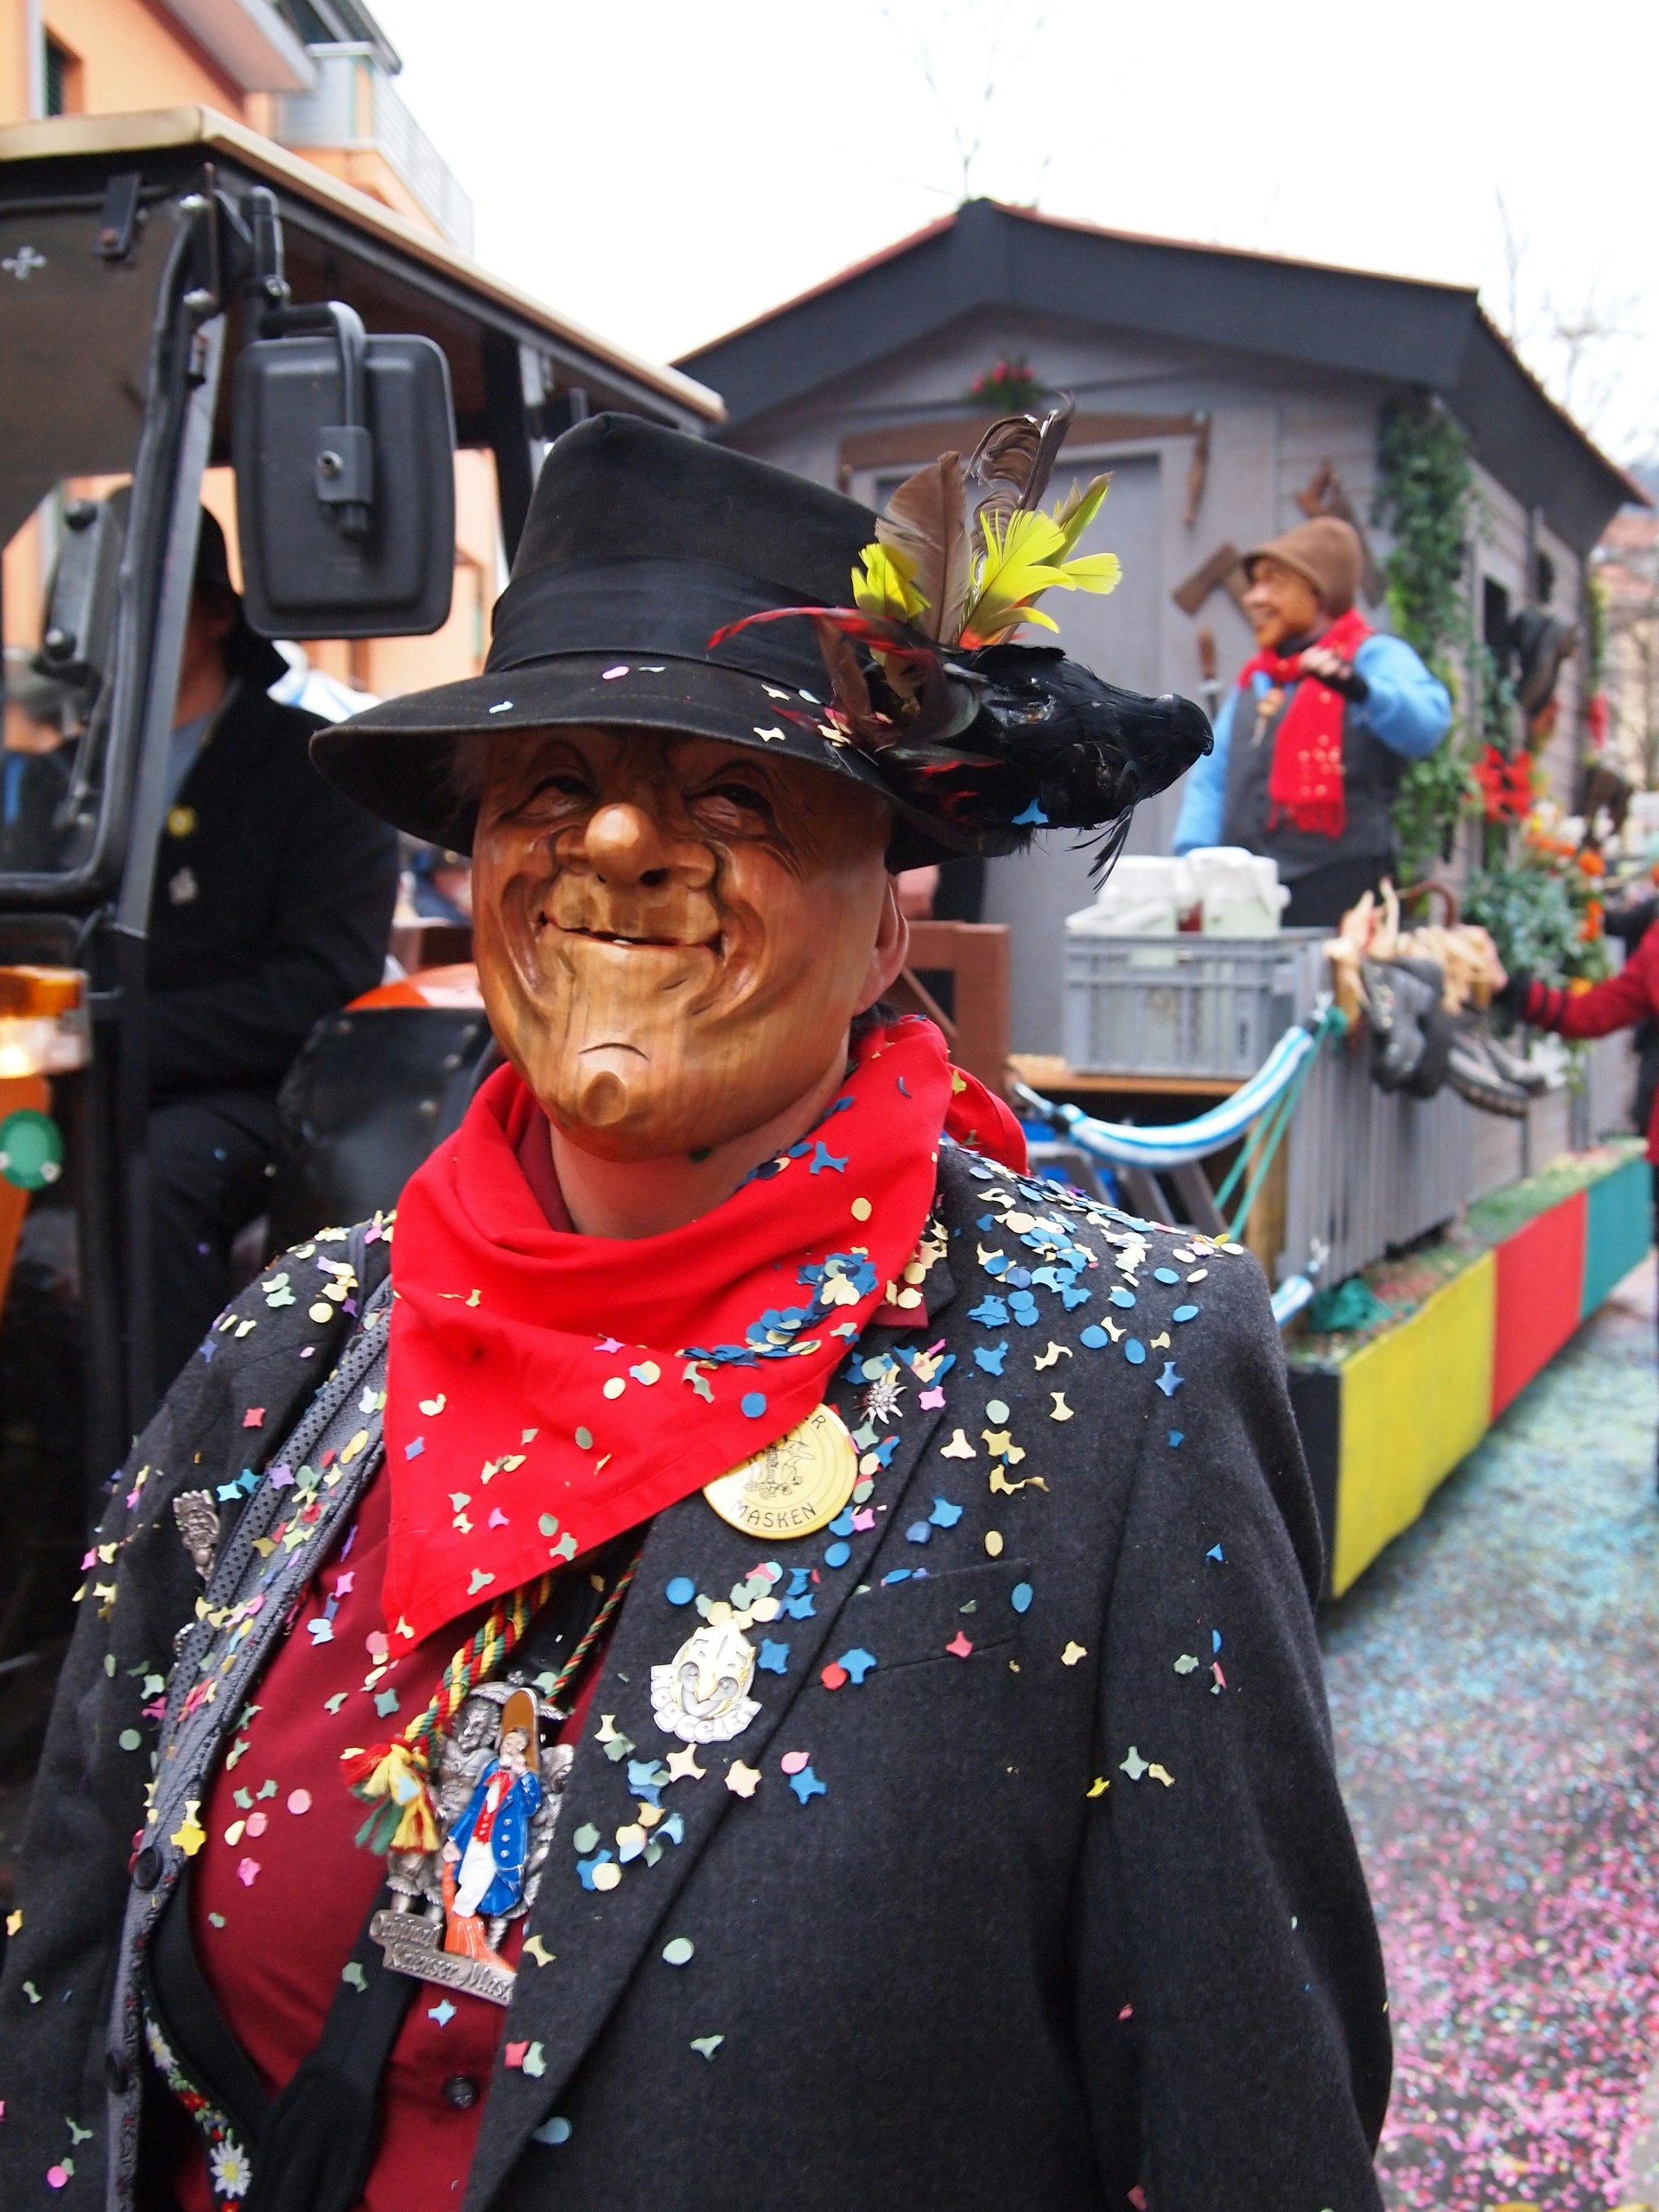 A person dressed formally covered in confetti wears a smiling wooden face mask